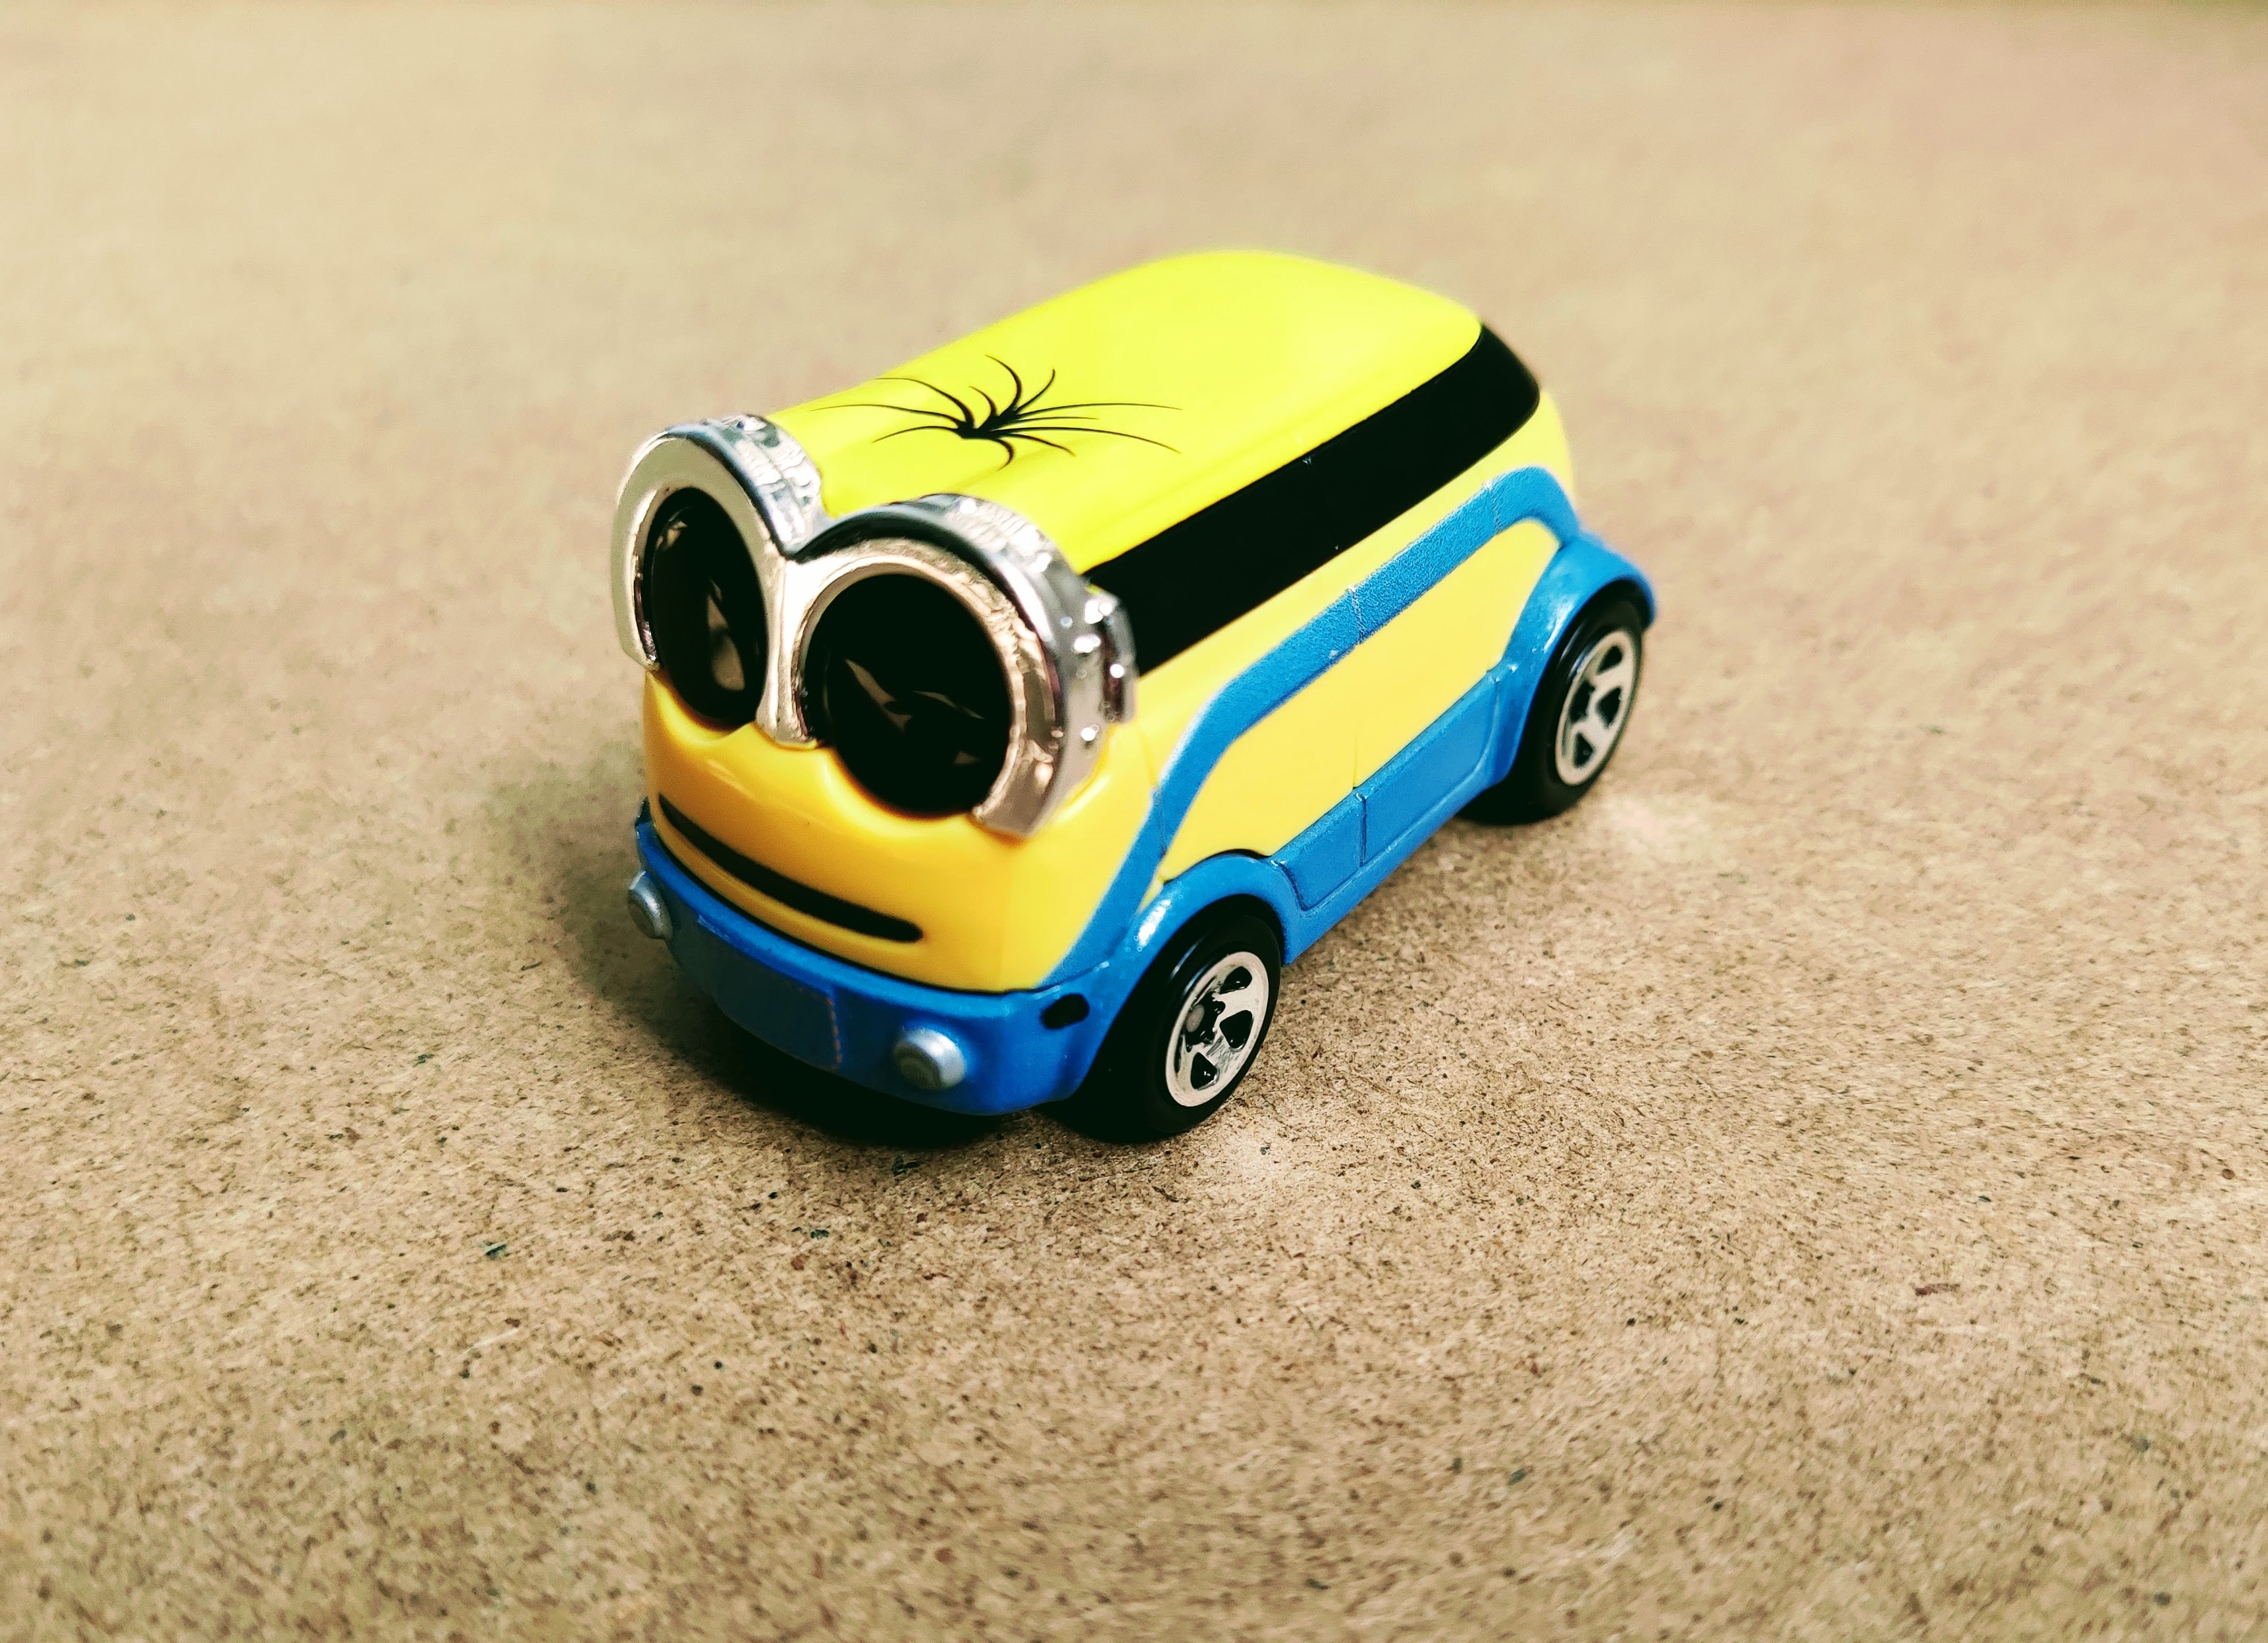 https://static.wikia.nocookie.net/hotwheels/images/9/99/Minion_Kevin_-_GMH80.jpg/revision/latest?cb=20220105144637